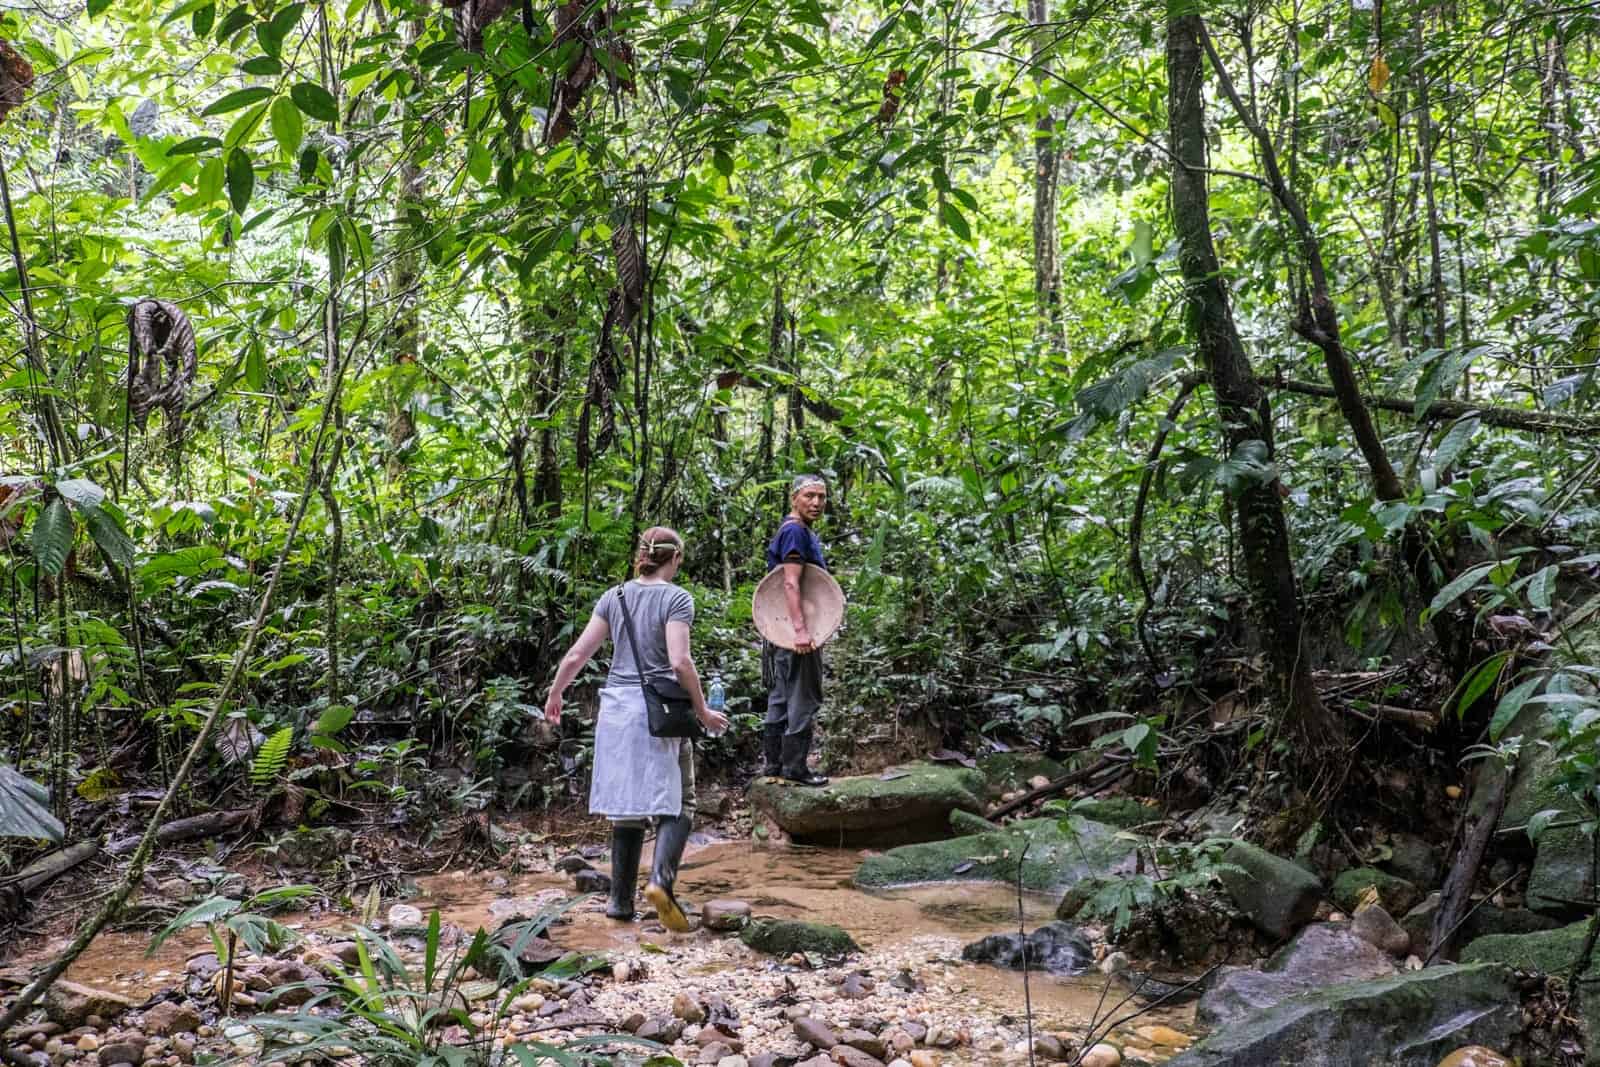 A woman follows a man carrying a large wooden bowel into the thick green foliage on a Jungle trek tour in the Ecuador Amazon.